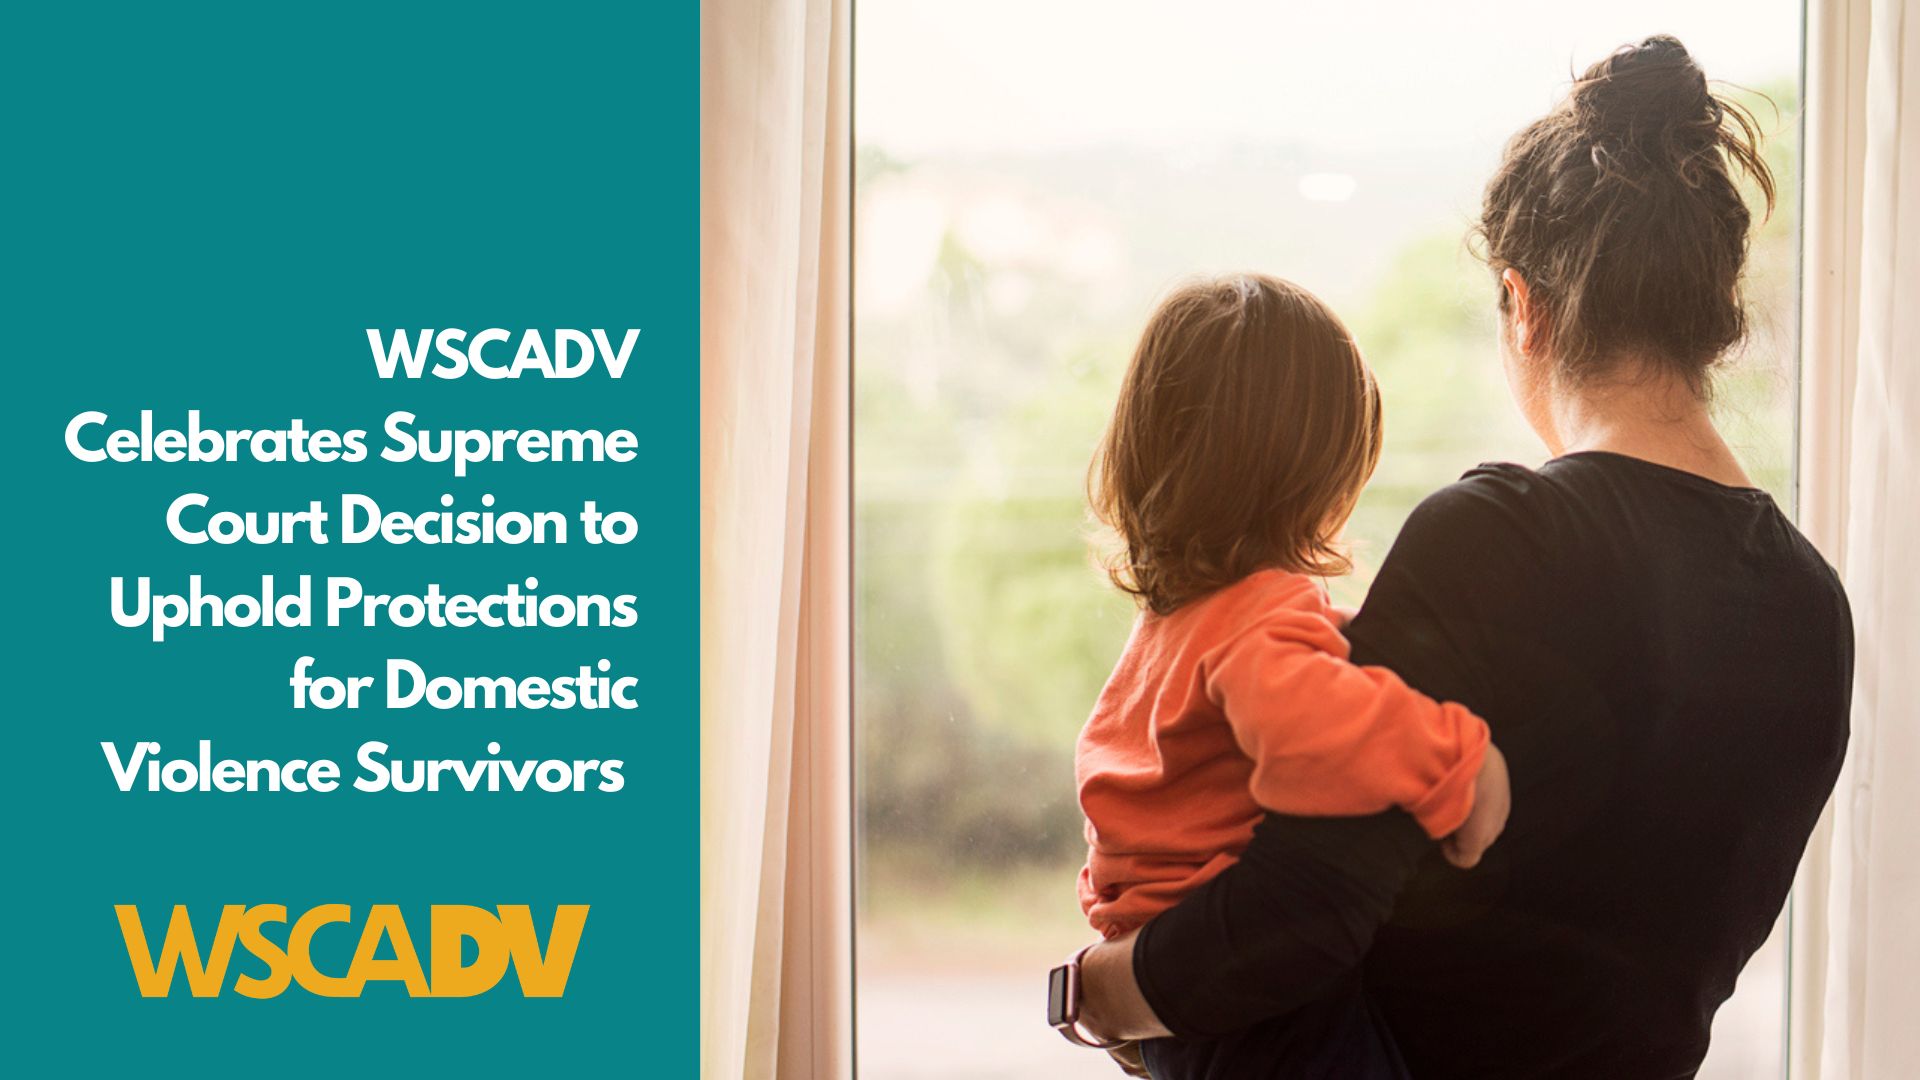 WSCADV Celebrates Supreme Court Decision to Uphold Protections for Domestic Violence Survivors